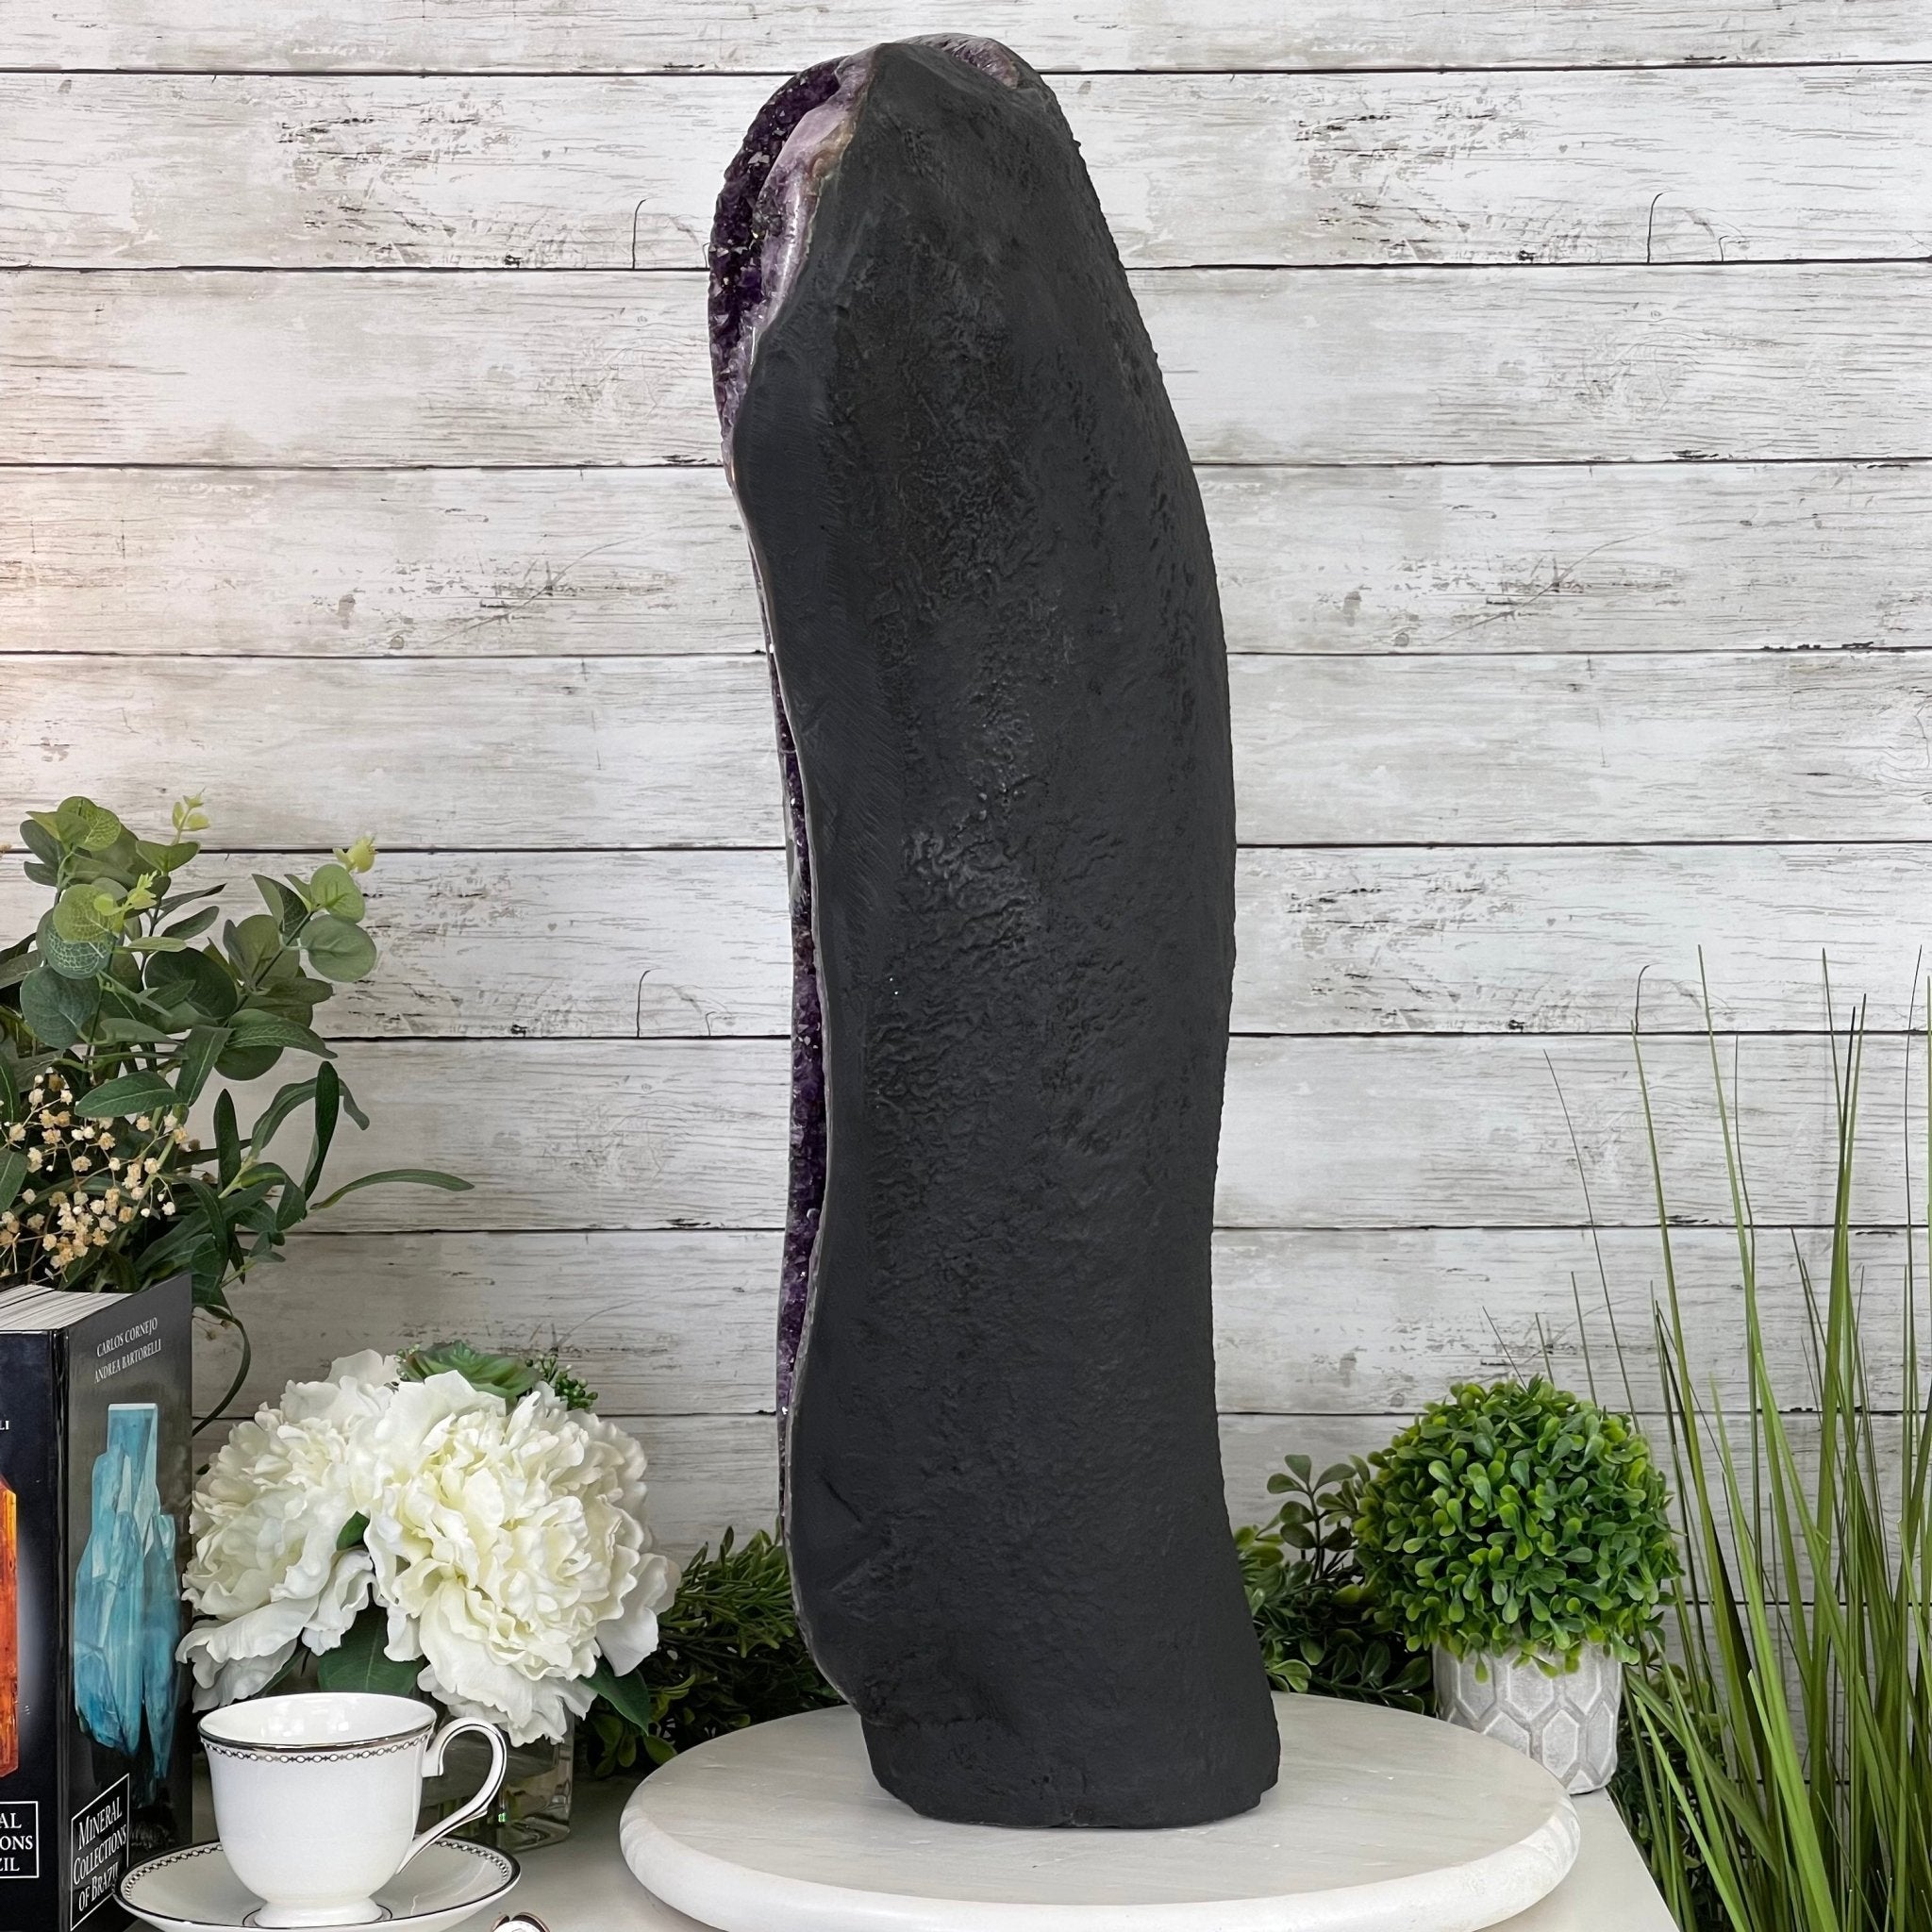 Super Quality Amethyst Druse Cluster on Cement Base, 28" Tall Model #5614-0064 by Brazil Gems - Brazil GemsBrazil GemsSuper Quality Amethyst Druse Cluster on Cement Base, 28" Tall Model #5614-0064 by Brazil GemsClusters on Cement Bases5614-0064